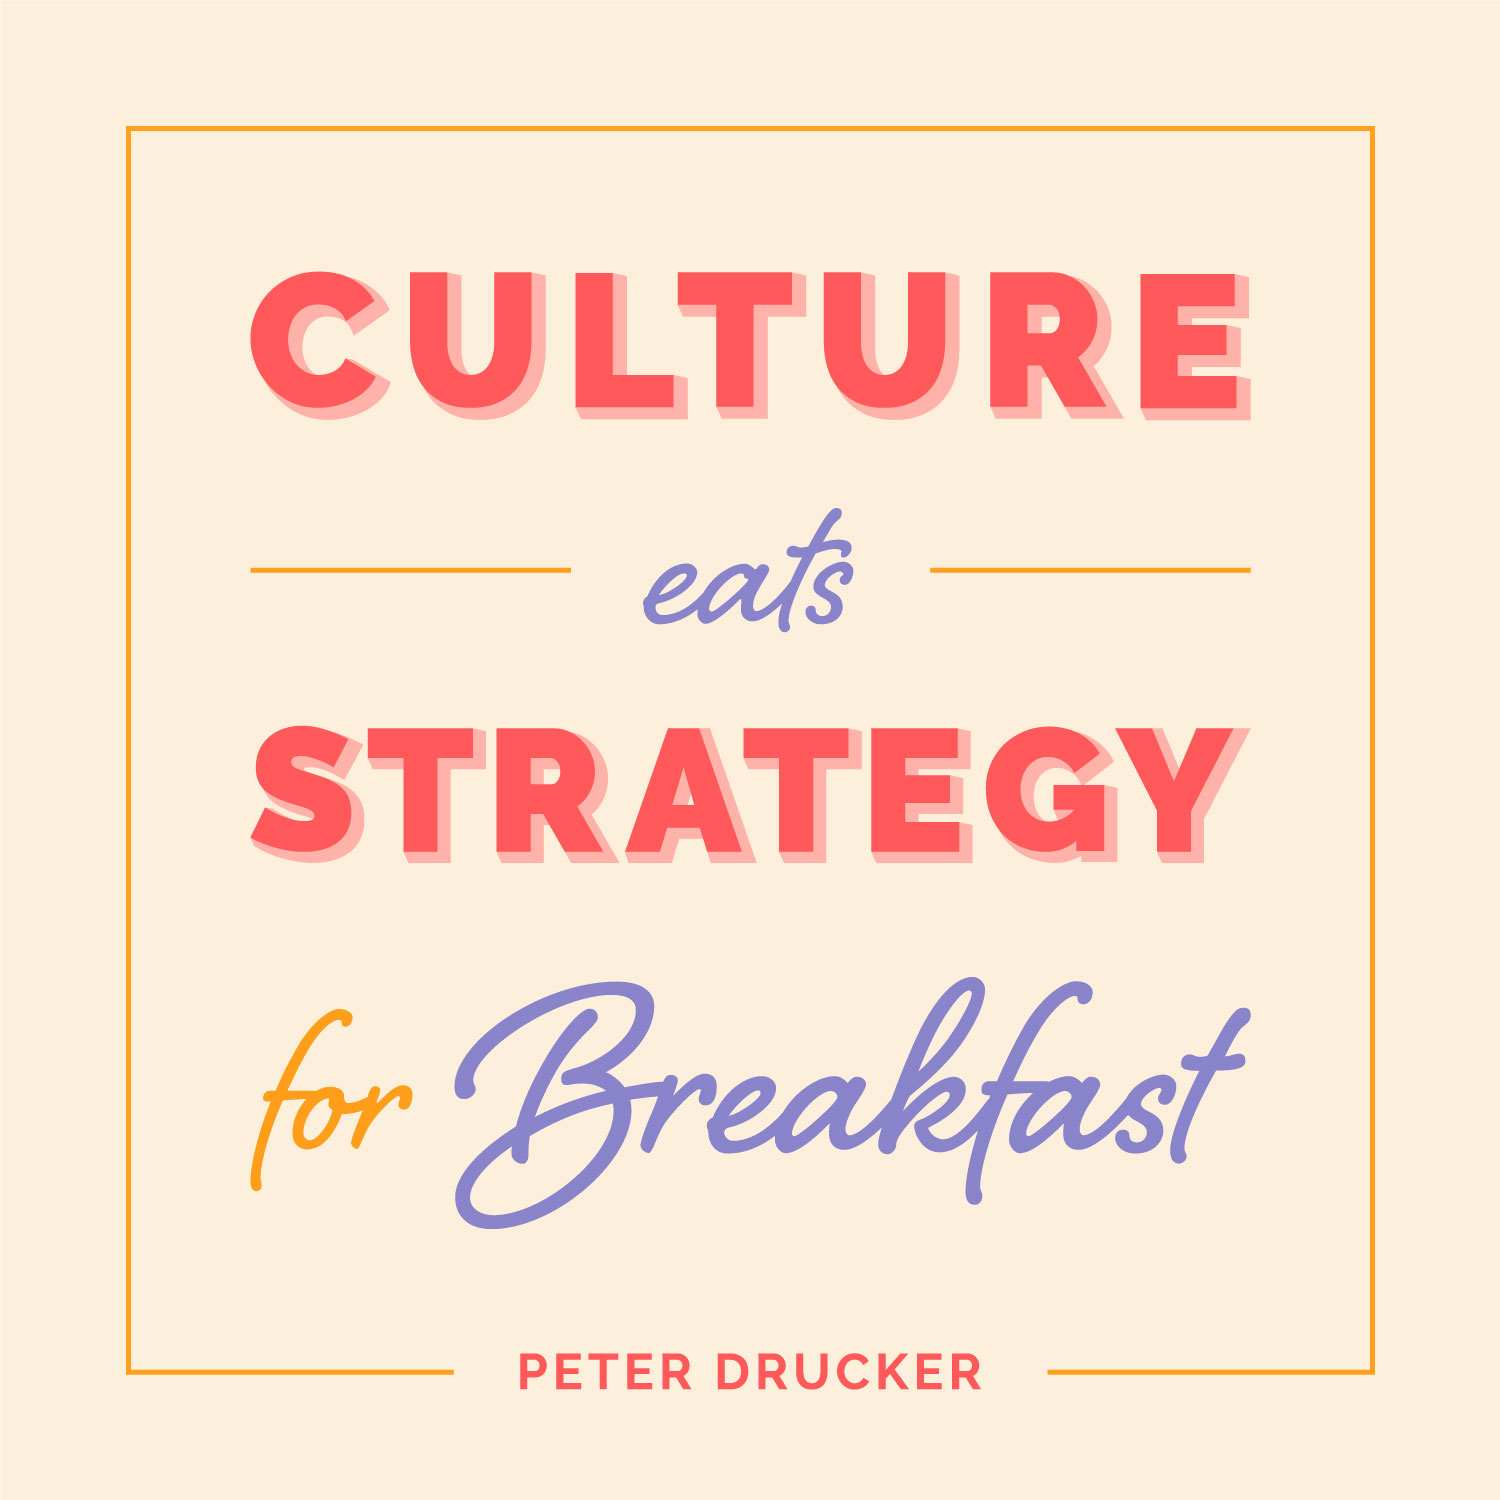 sales kickoff culture eats strategy for breakfast quote